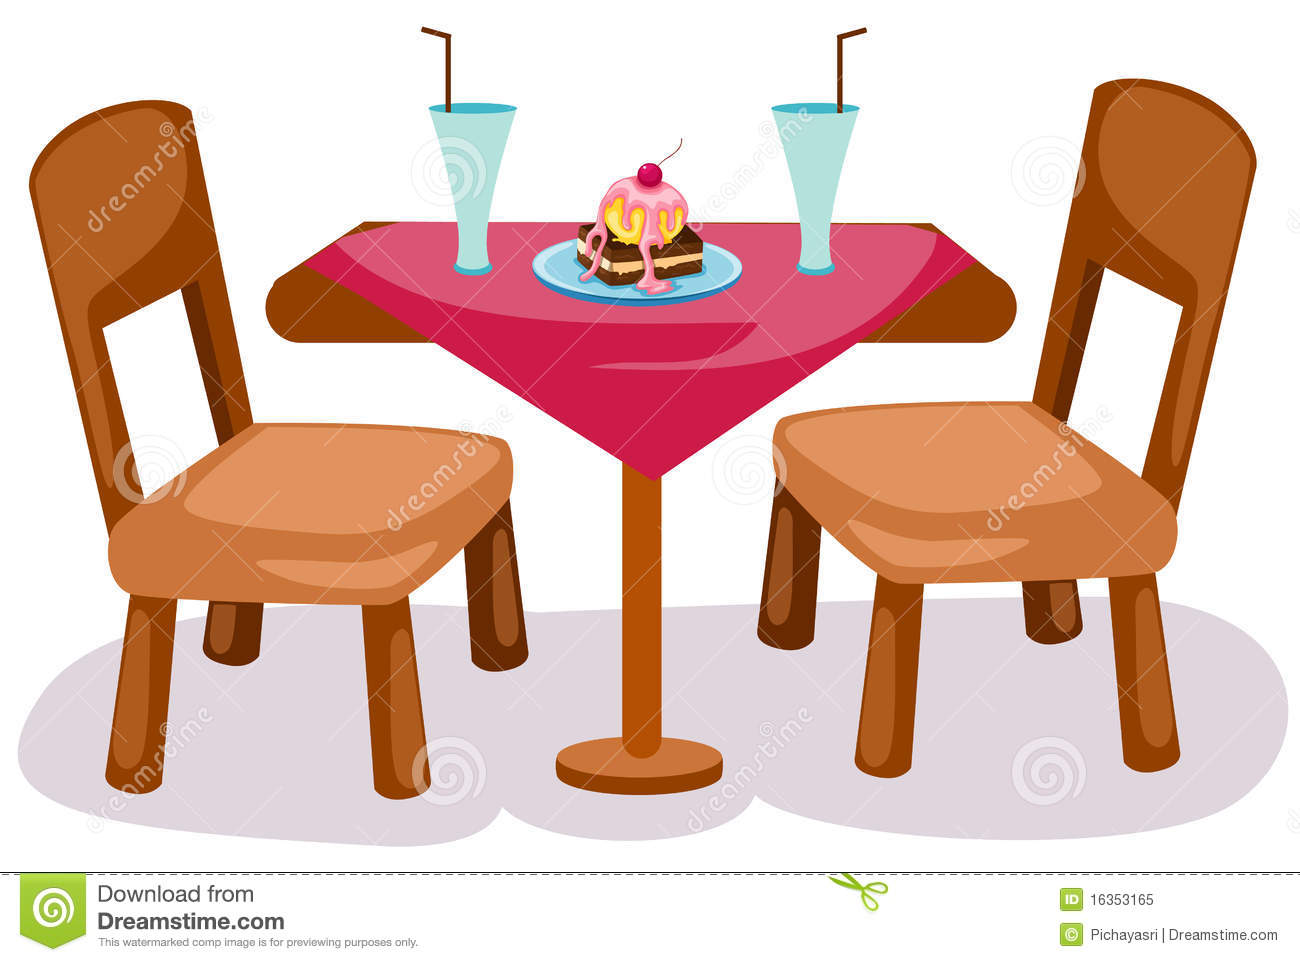 Clipart table table chair. Cartoon pencil and in